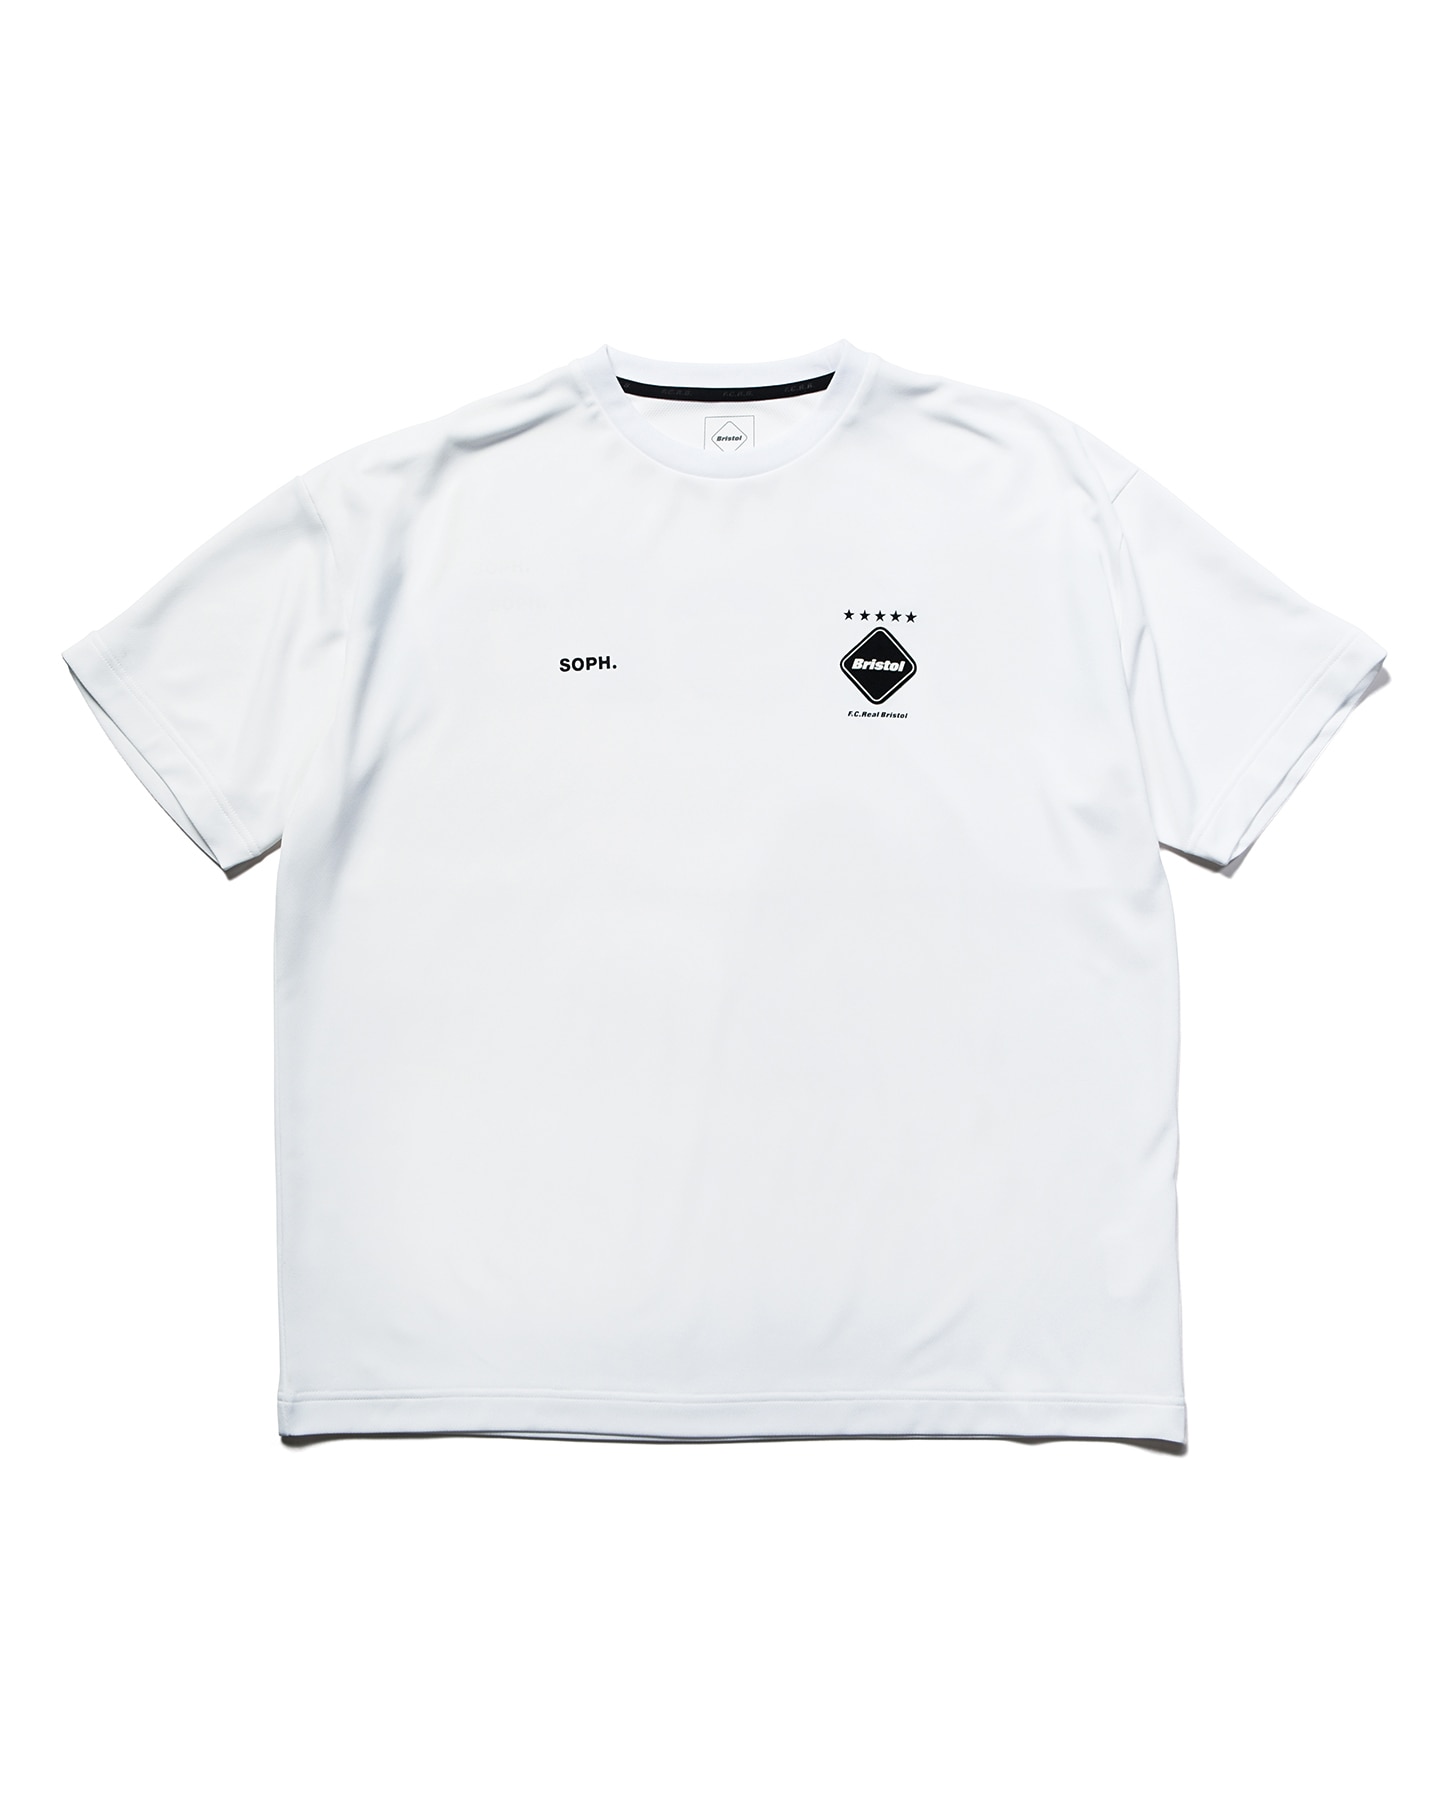 FCRB BIG LOGO WIDE TEE Tシャツ